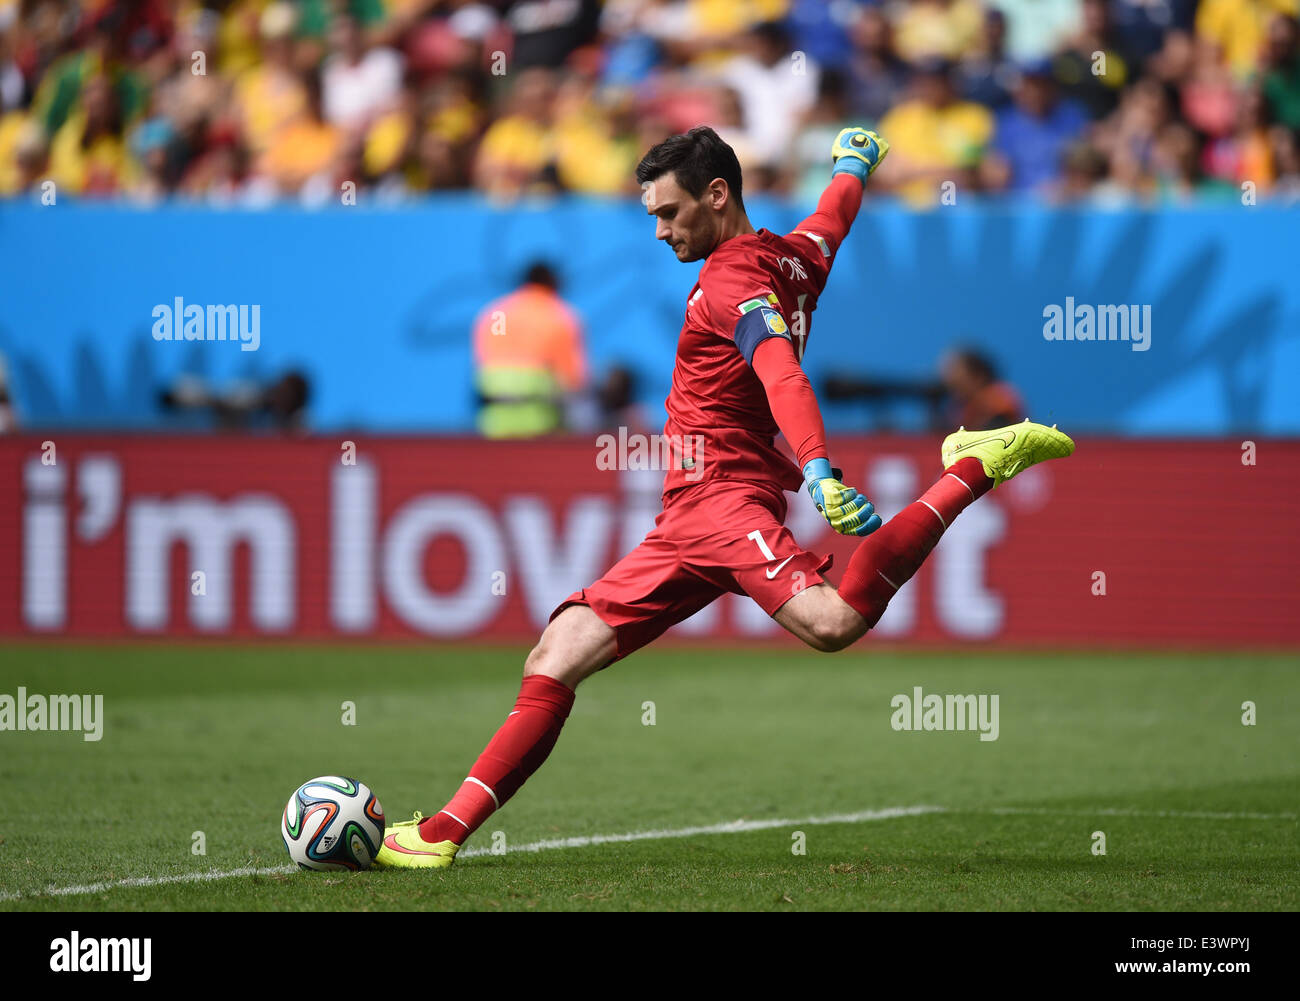 Brasilia, Brazil. 30th June, 2014. Goalkeeper Hugo Lloris of France in action during the FIFA World Cup 2014 round of 16 match between France and Nigeria at the Estadio National Stadium in Brasilia, Brazil, on 30 June 2014. Credit:  dpa picture alliance/Alamy Live News Stock Photo